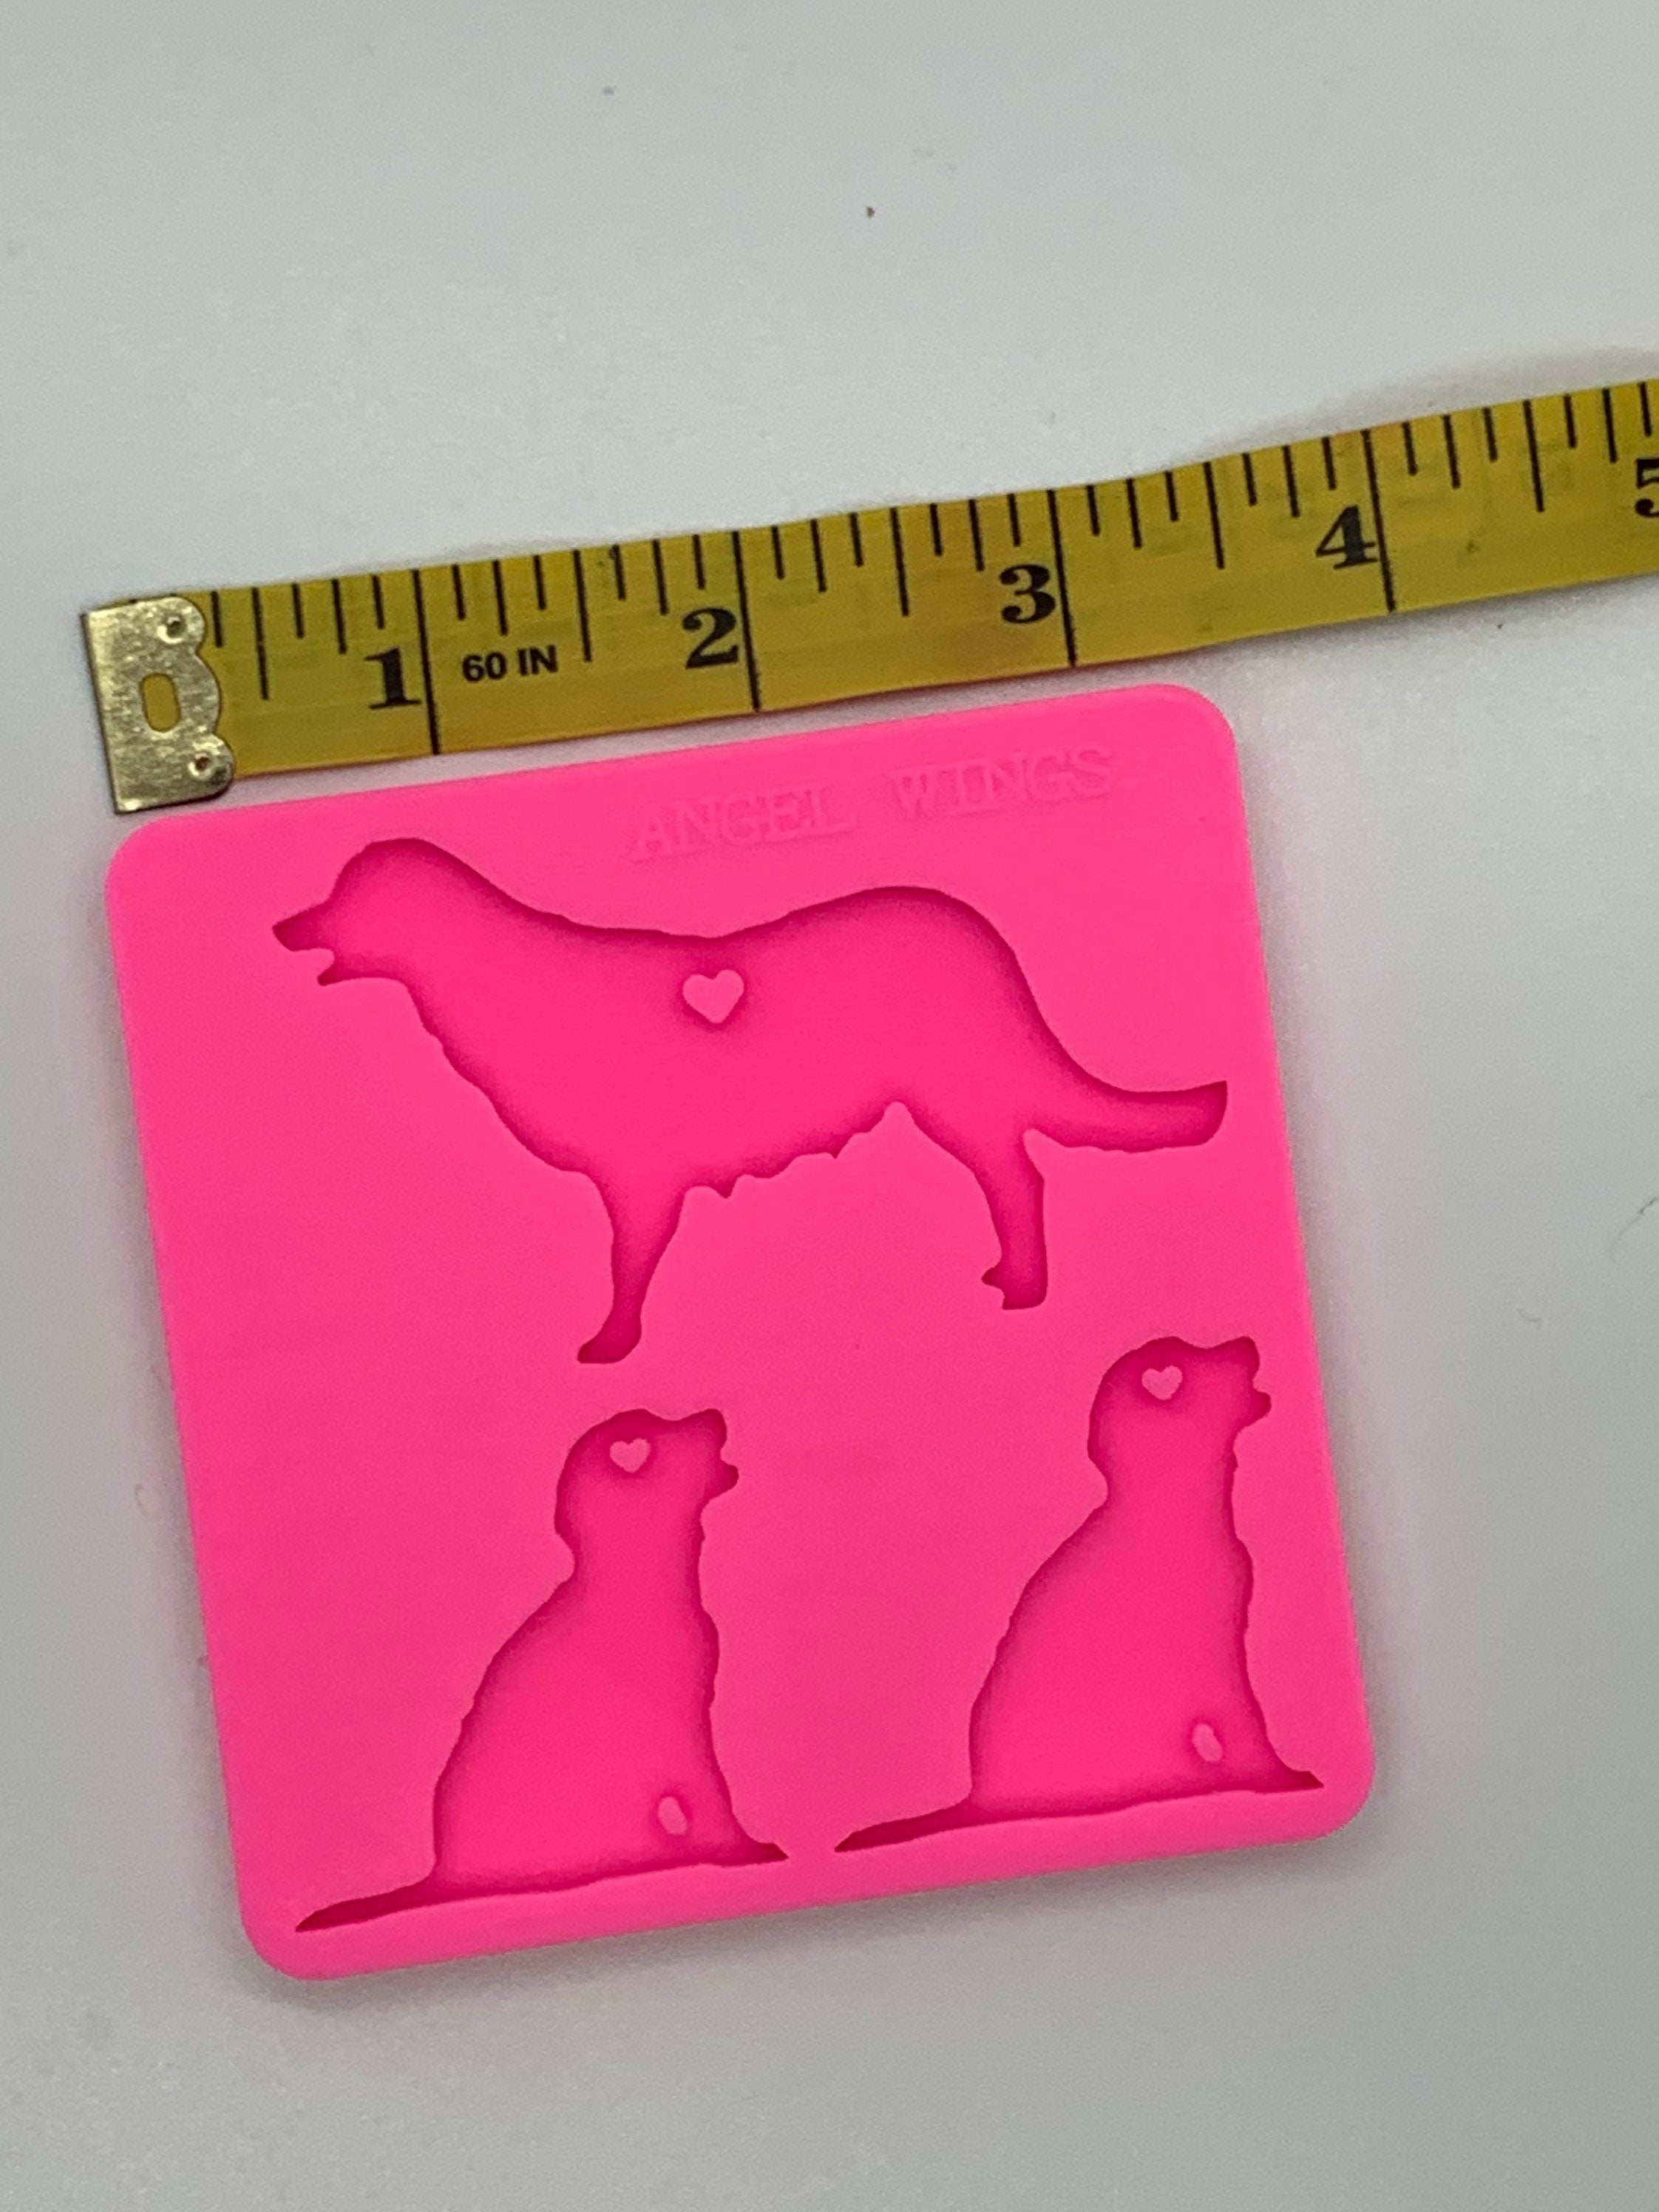 Golden Retriever Family Shiny Silicone Mold for Epoxy Resin Crafts